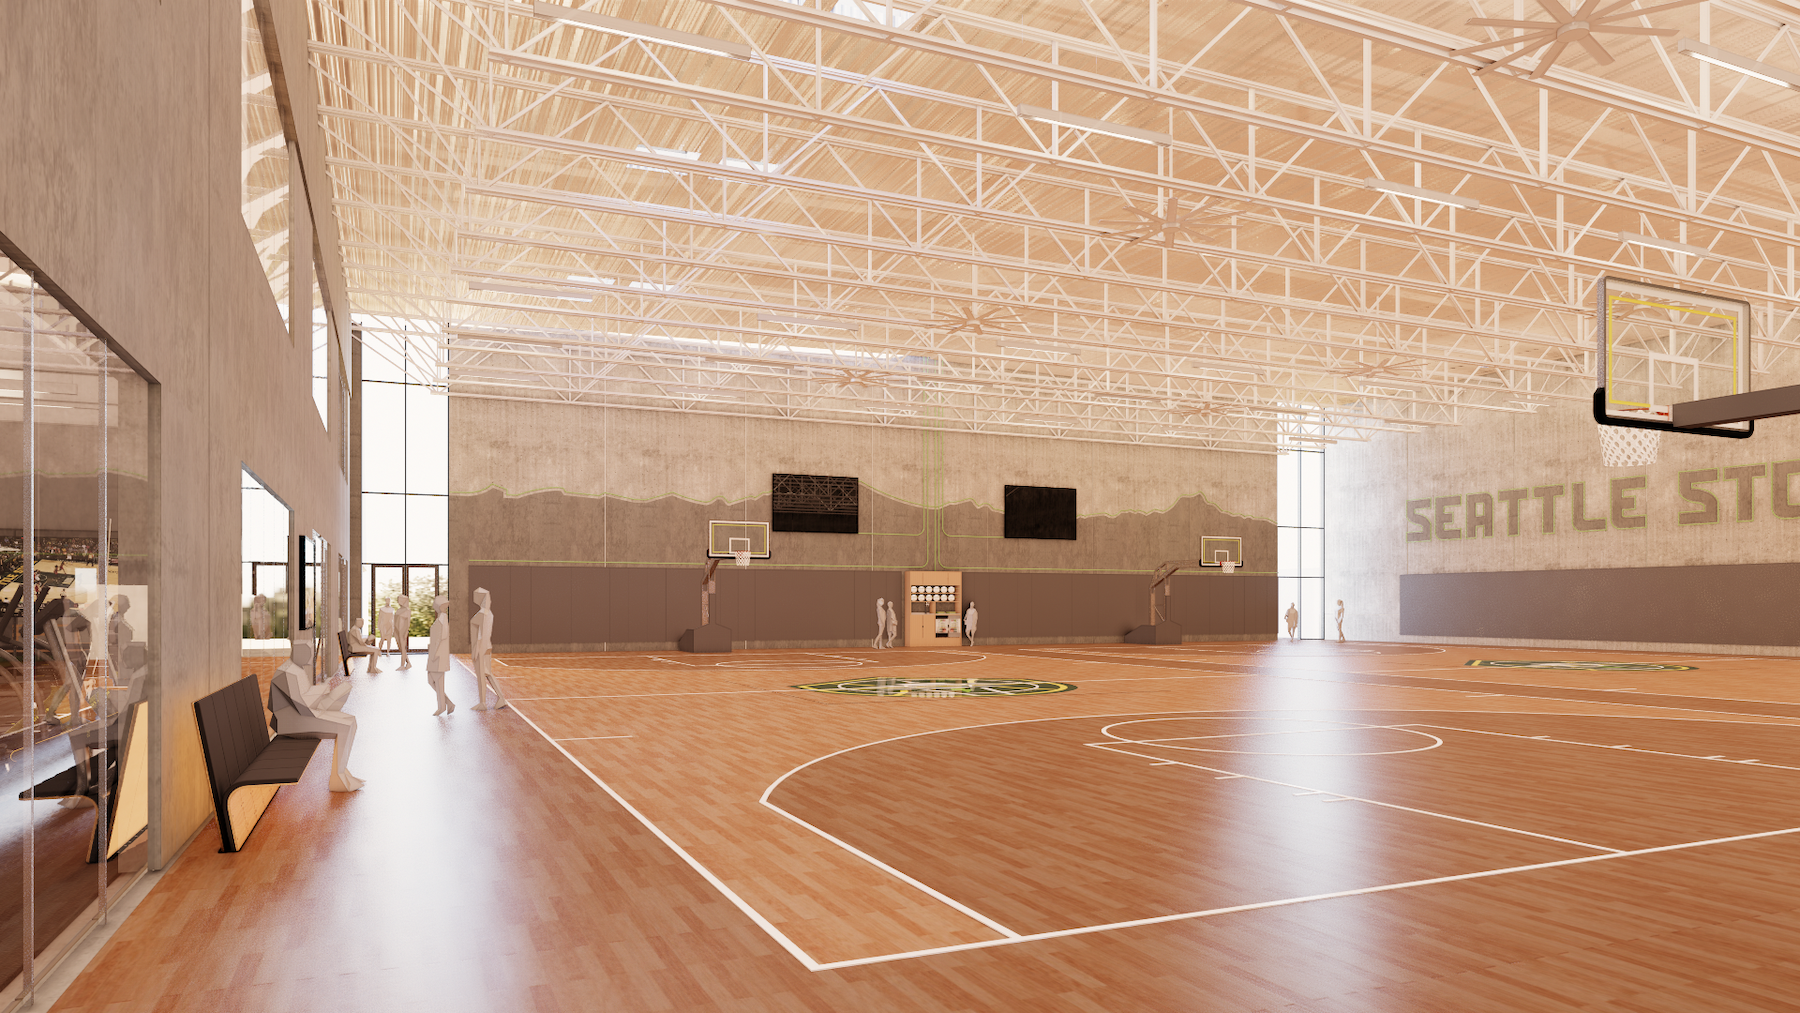 WNBA practice facility will offer training opportunities for female athletes and youth 